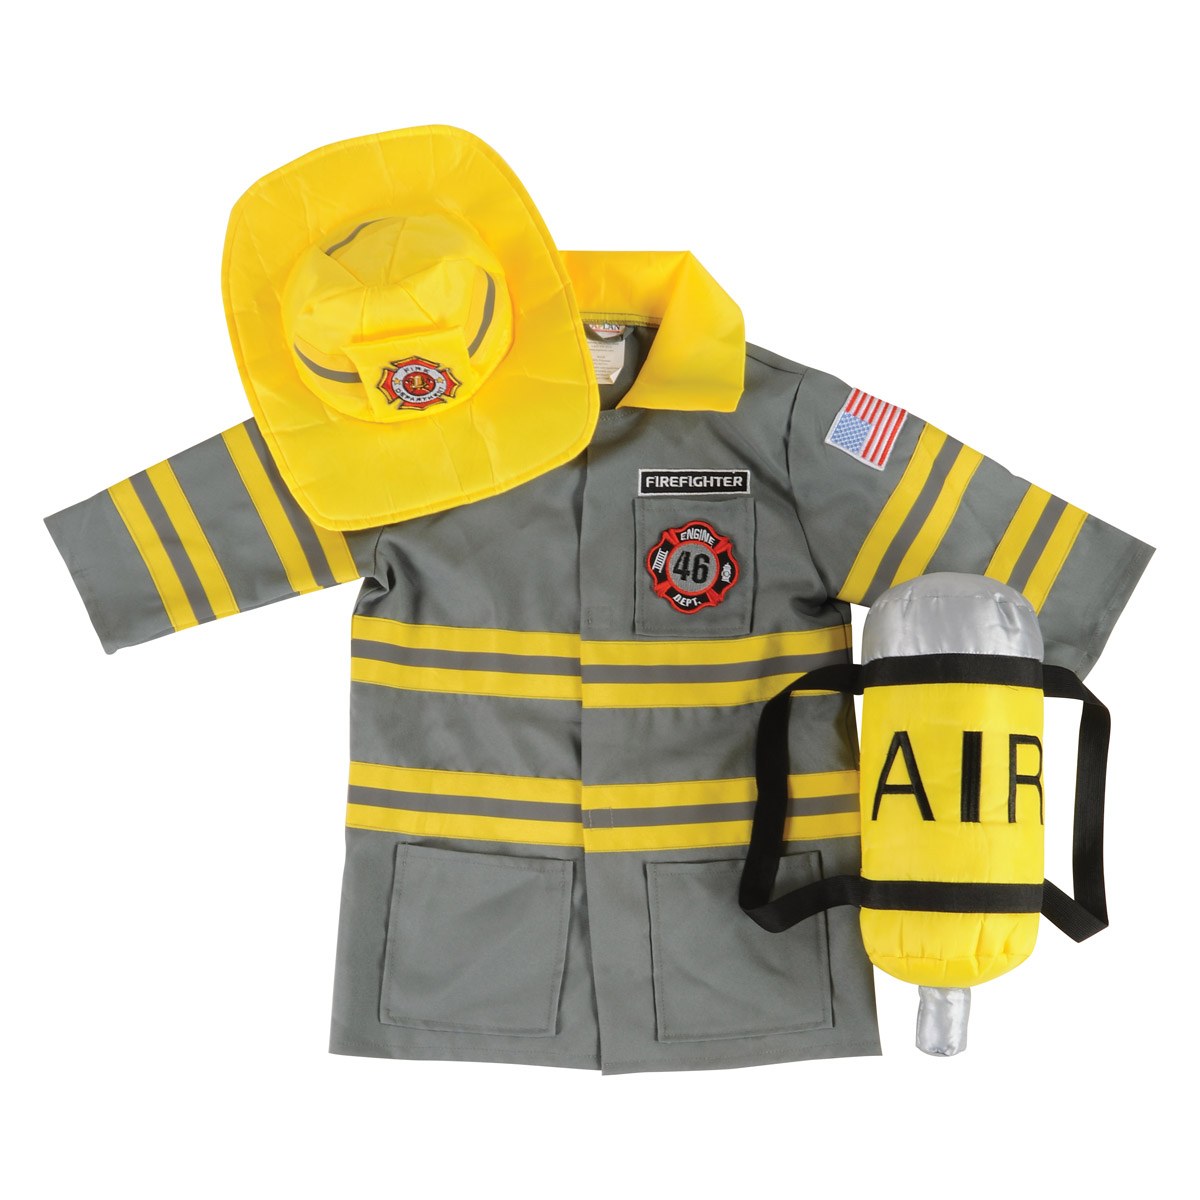 Kaplan Early Learning Company Firefighter Dress-Up